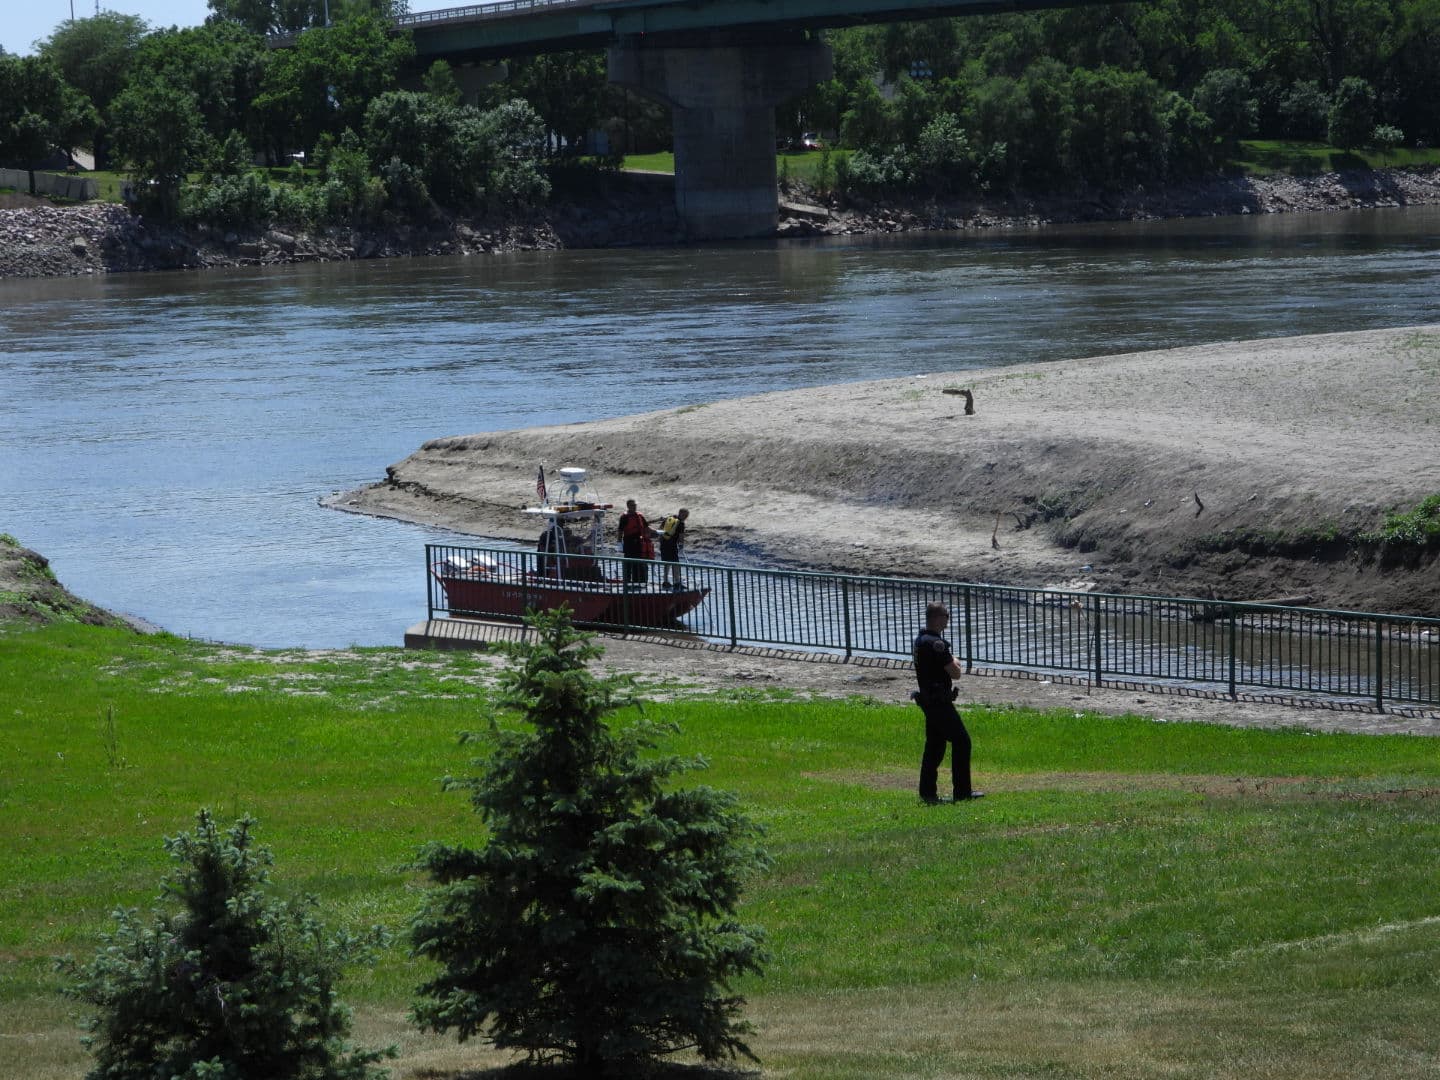 Male Body Recovered From Perry Creek at Missouri River